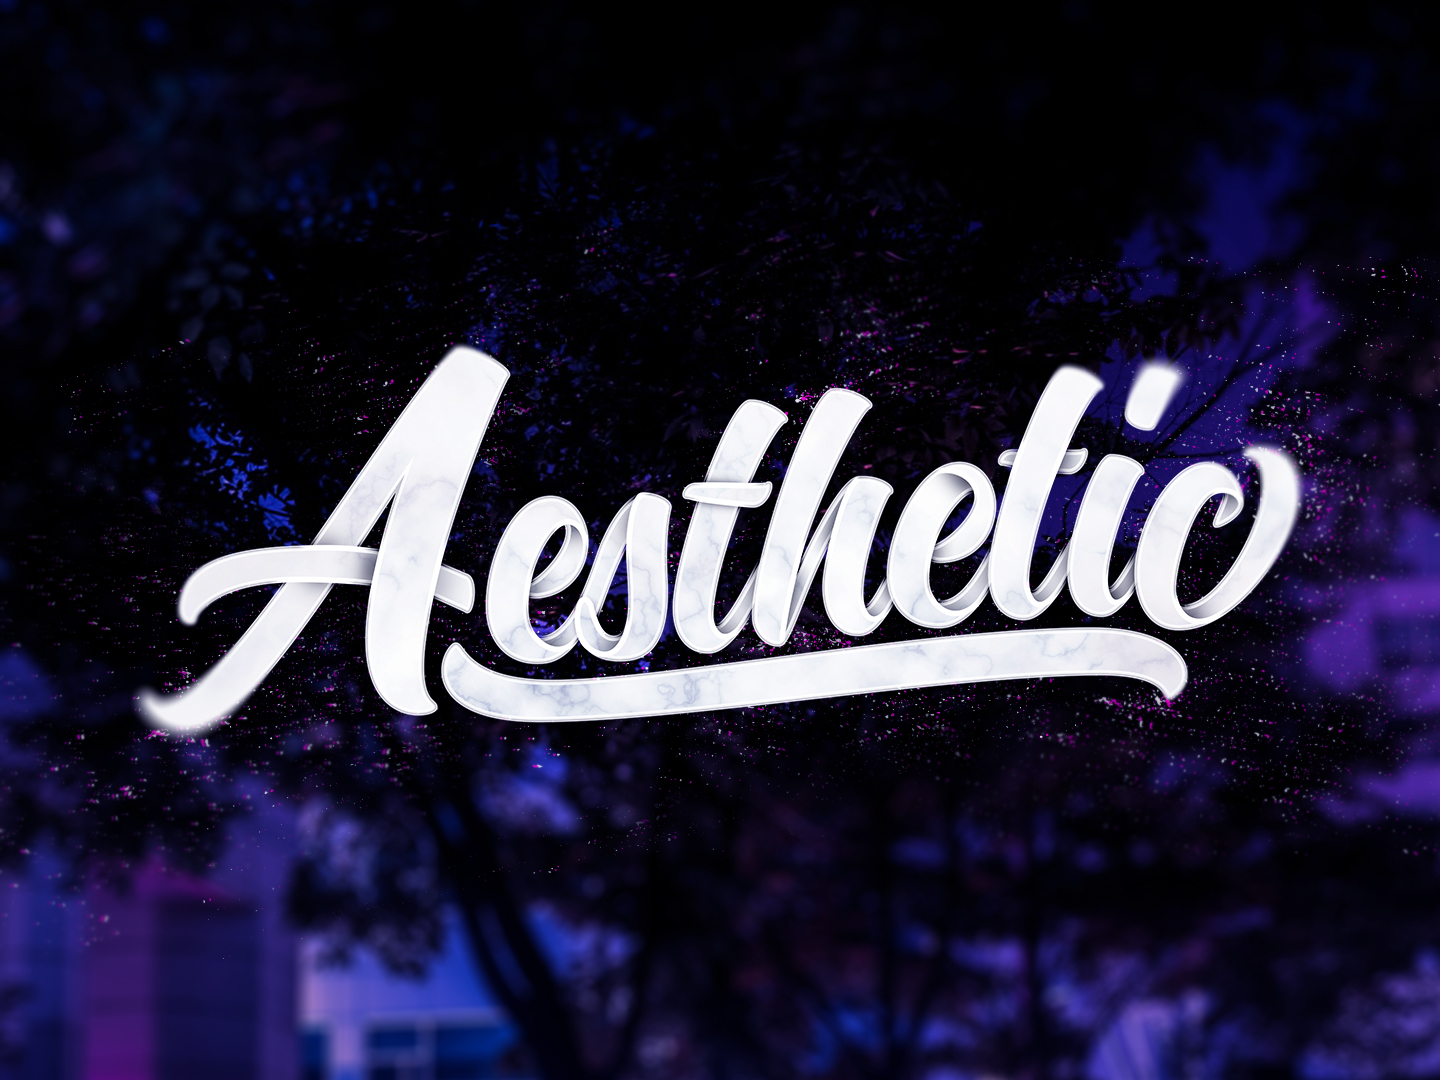 aesthetic グ下ボ by James Butterly on Dribbble